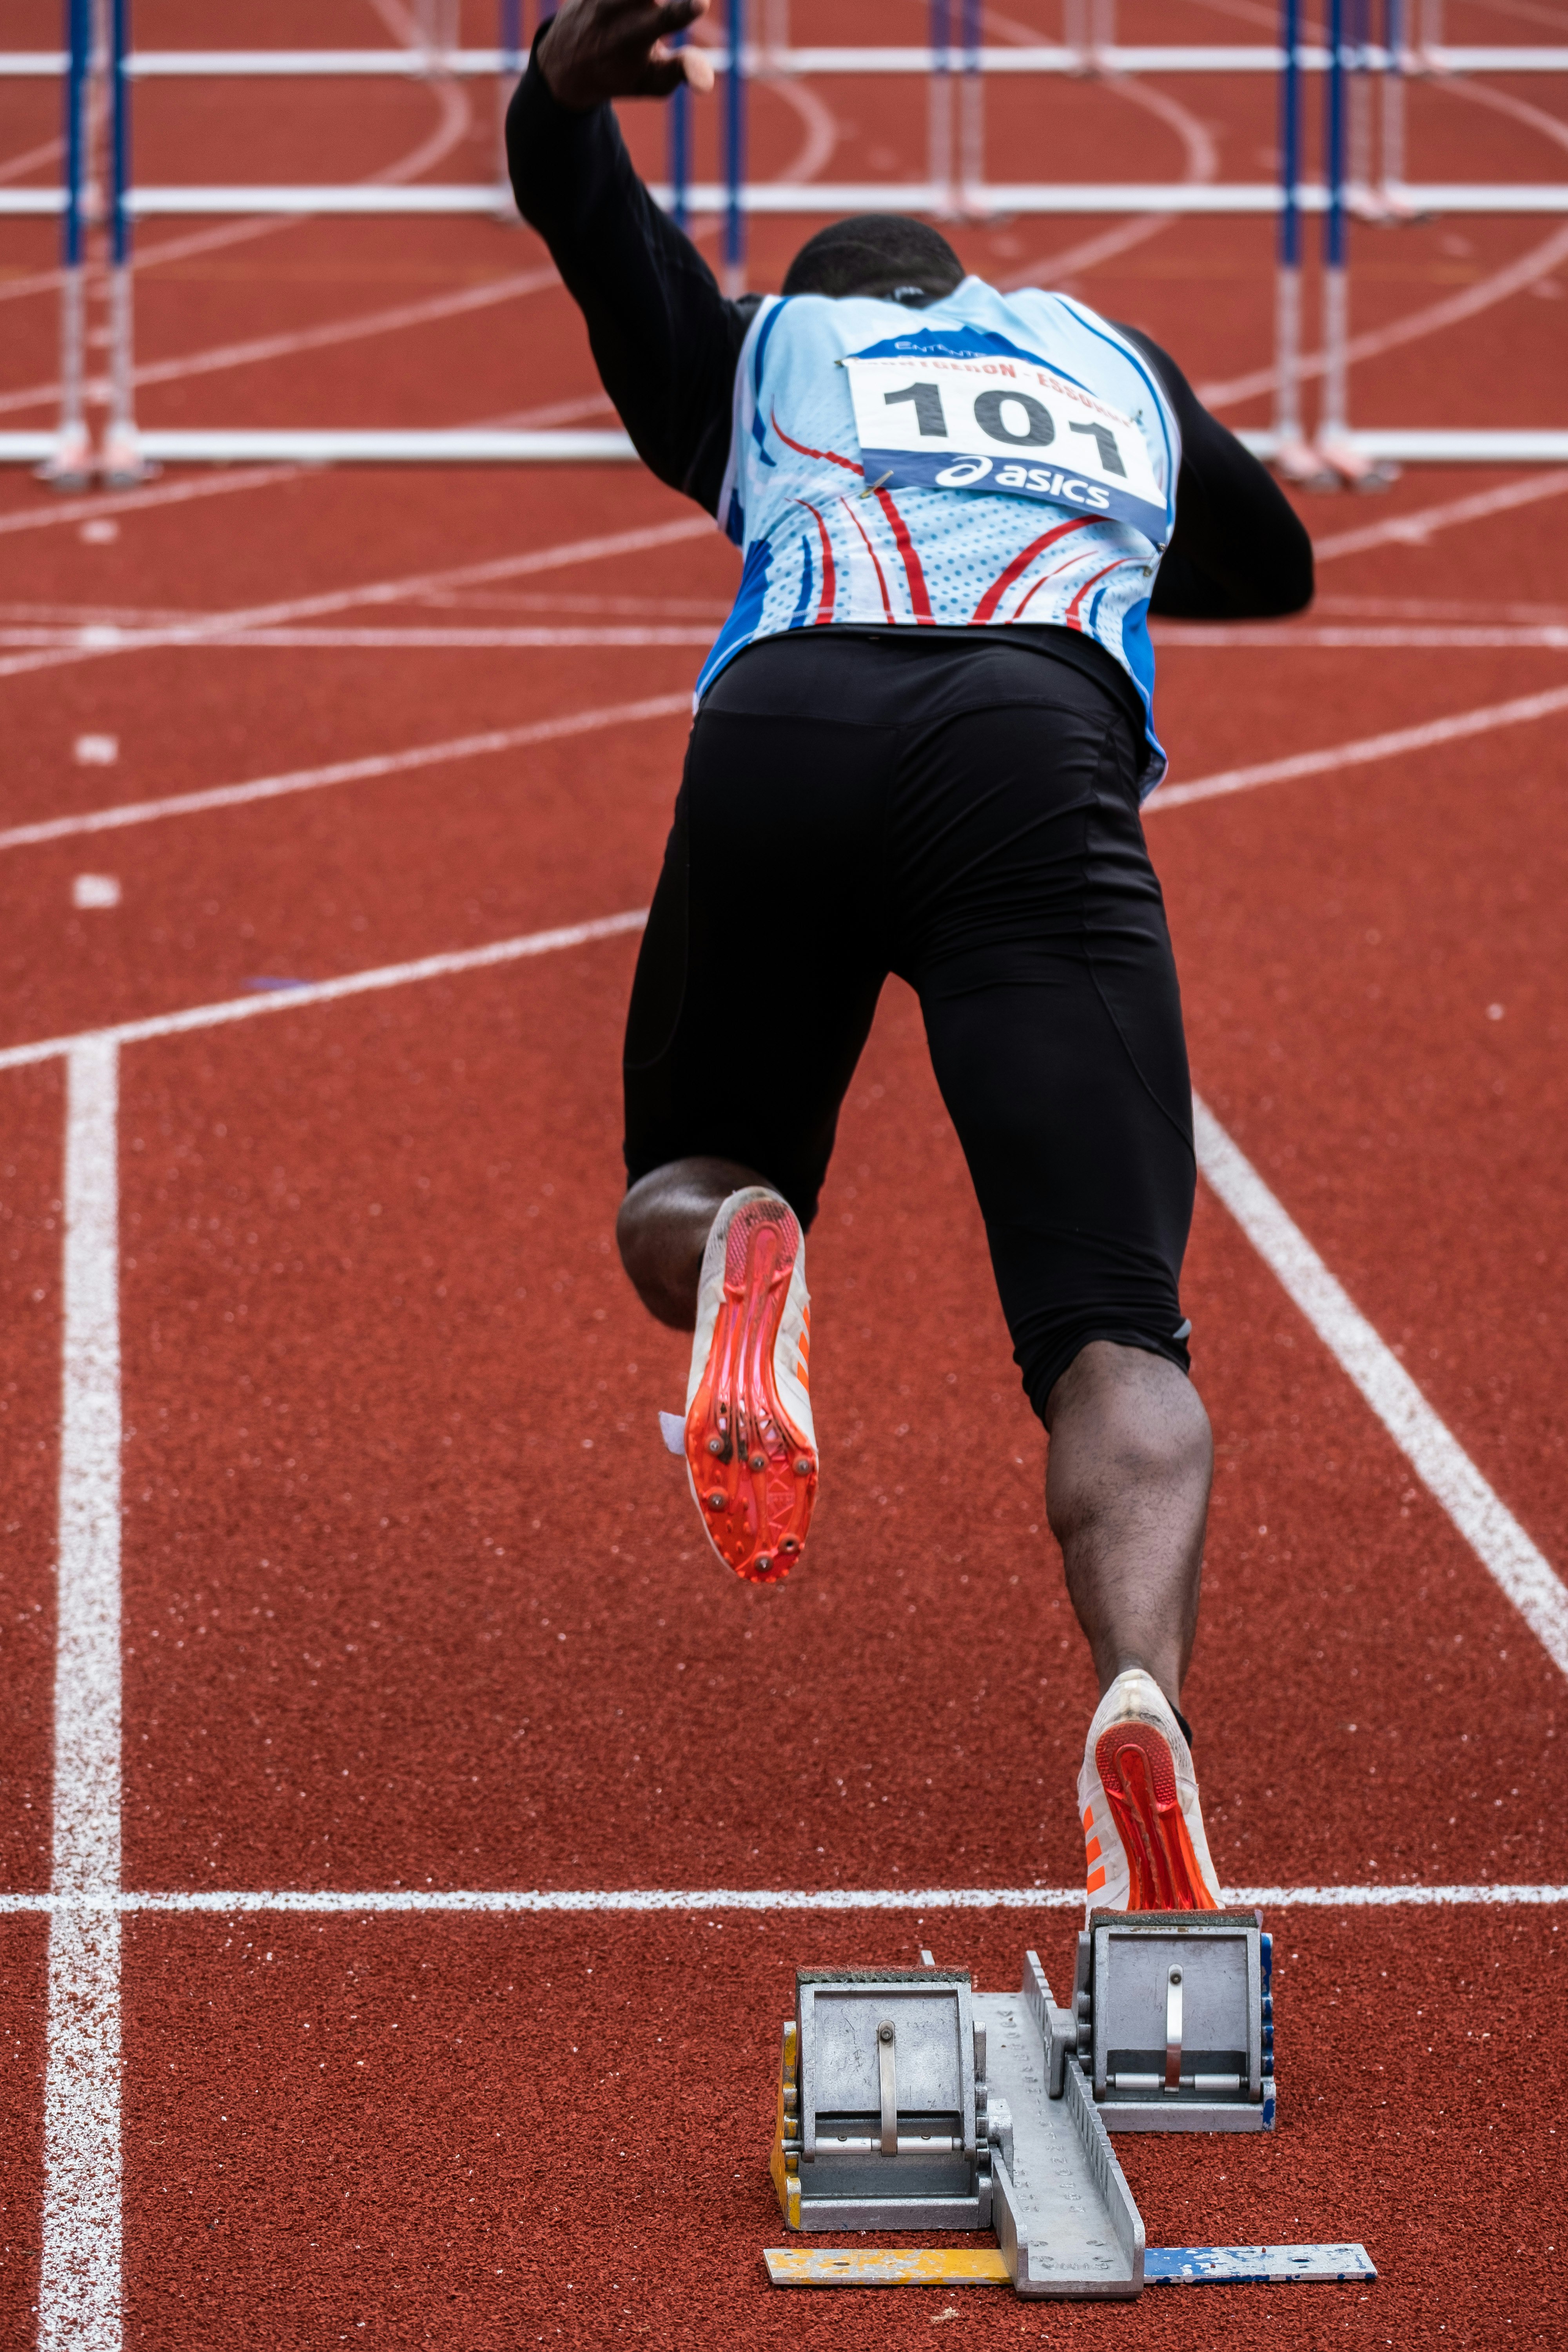 Shot during 34th international Elite athletics meeting in Montgeron-Essonne (France), Sunday, May 13th, 2018